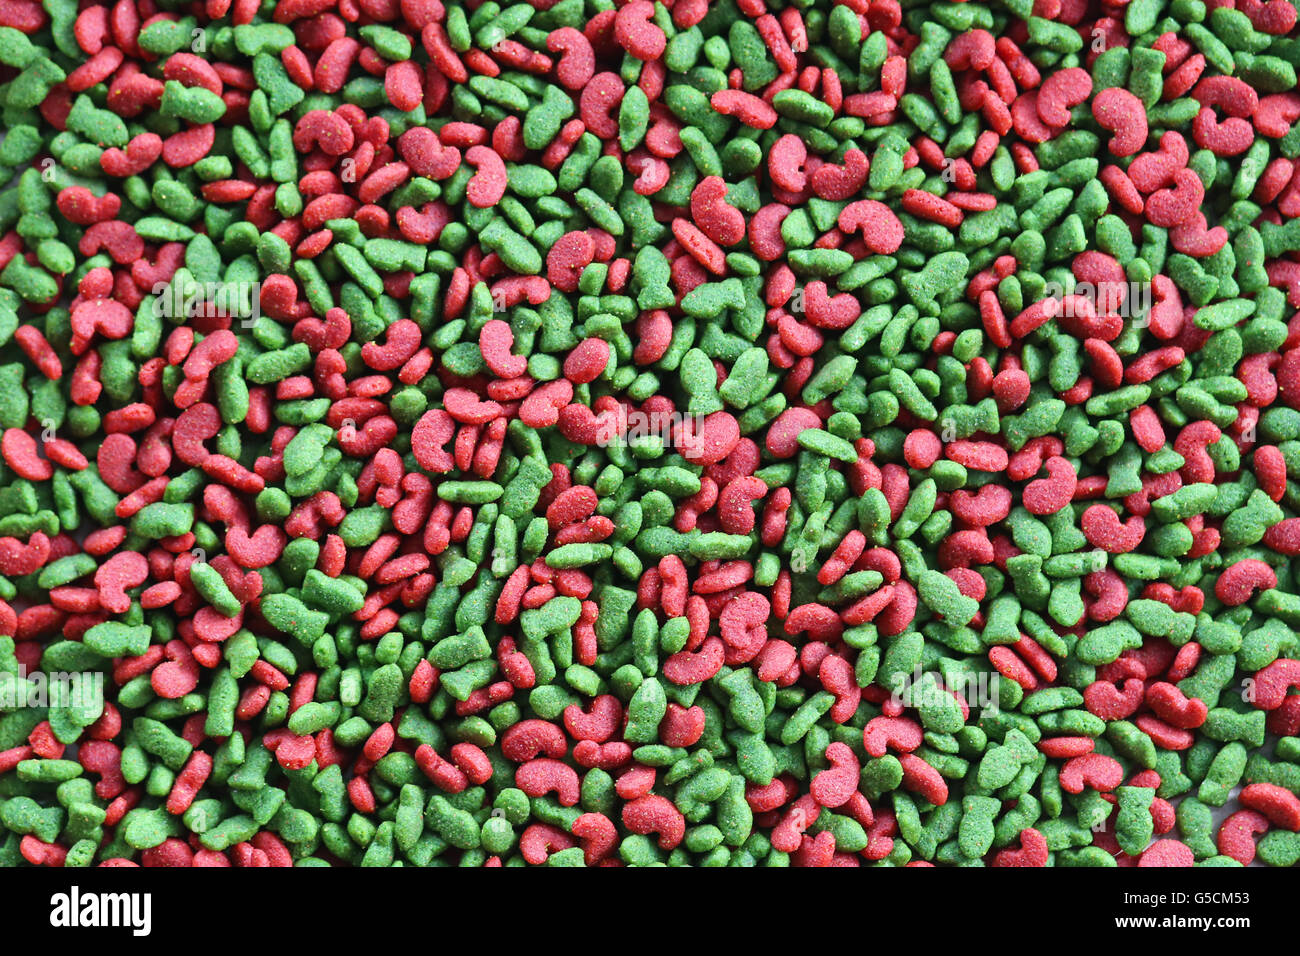 cat food green and red texure background Stock Photo